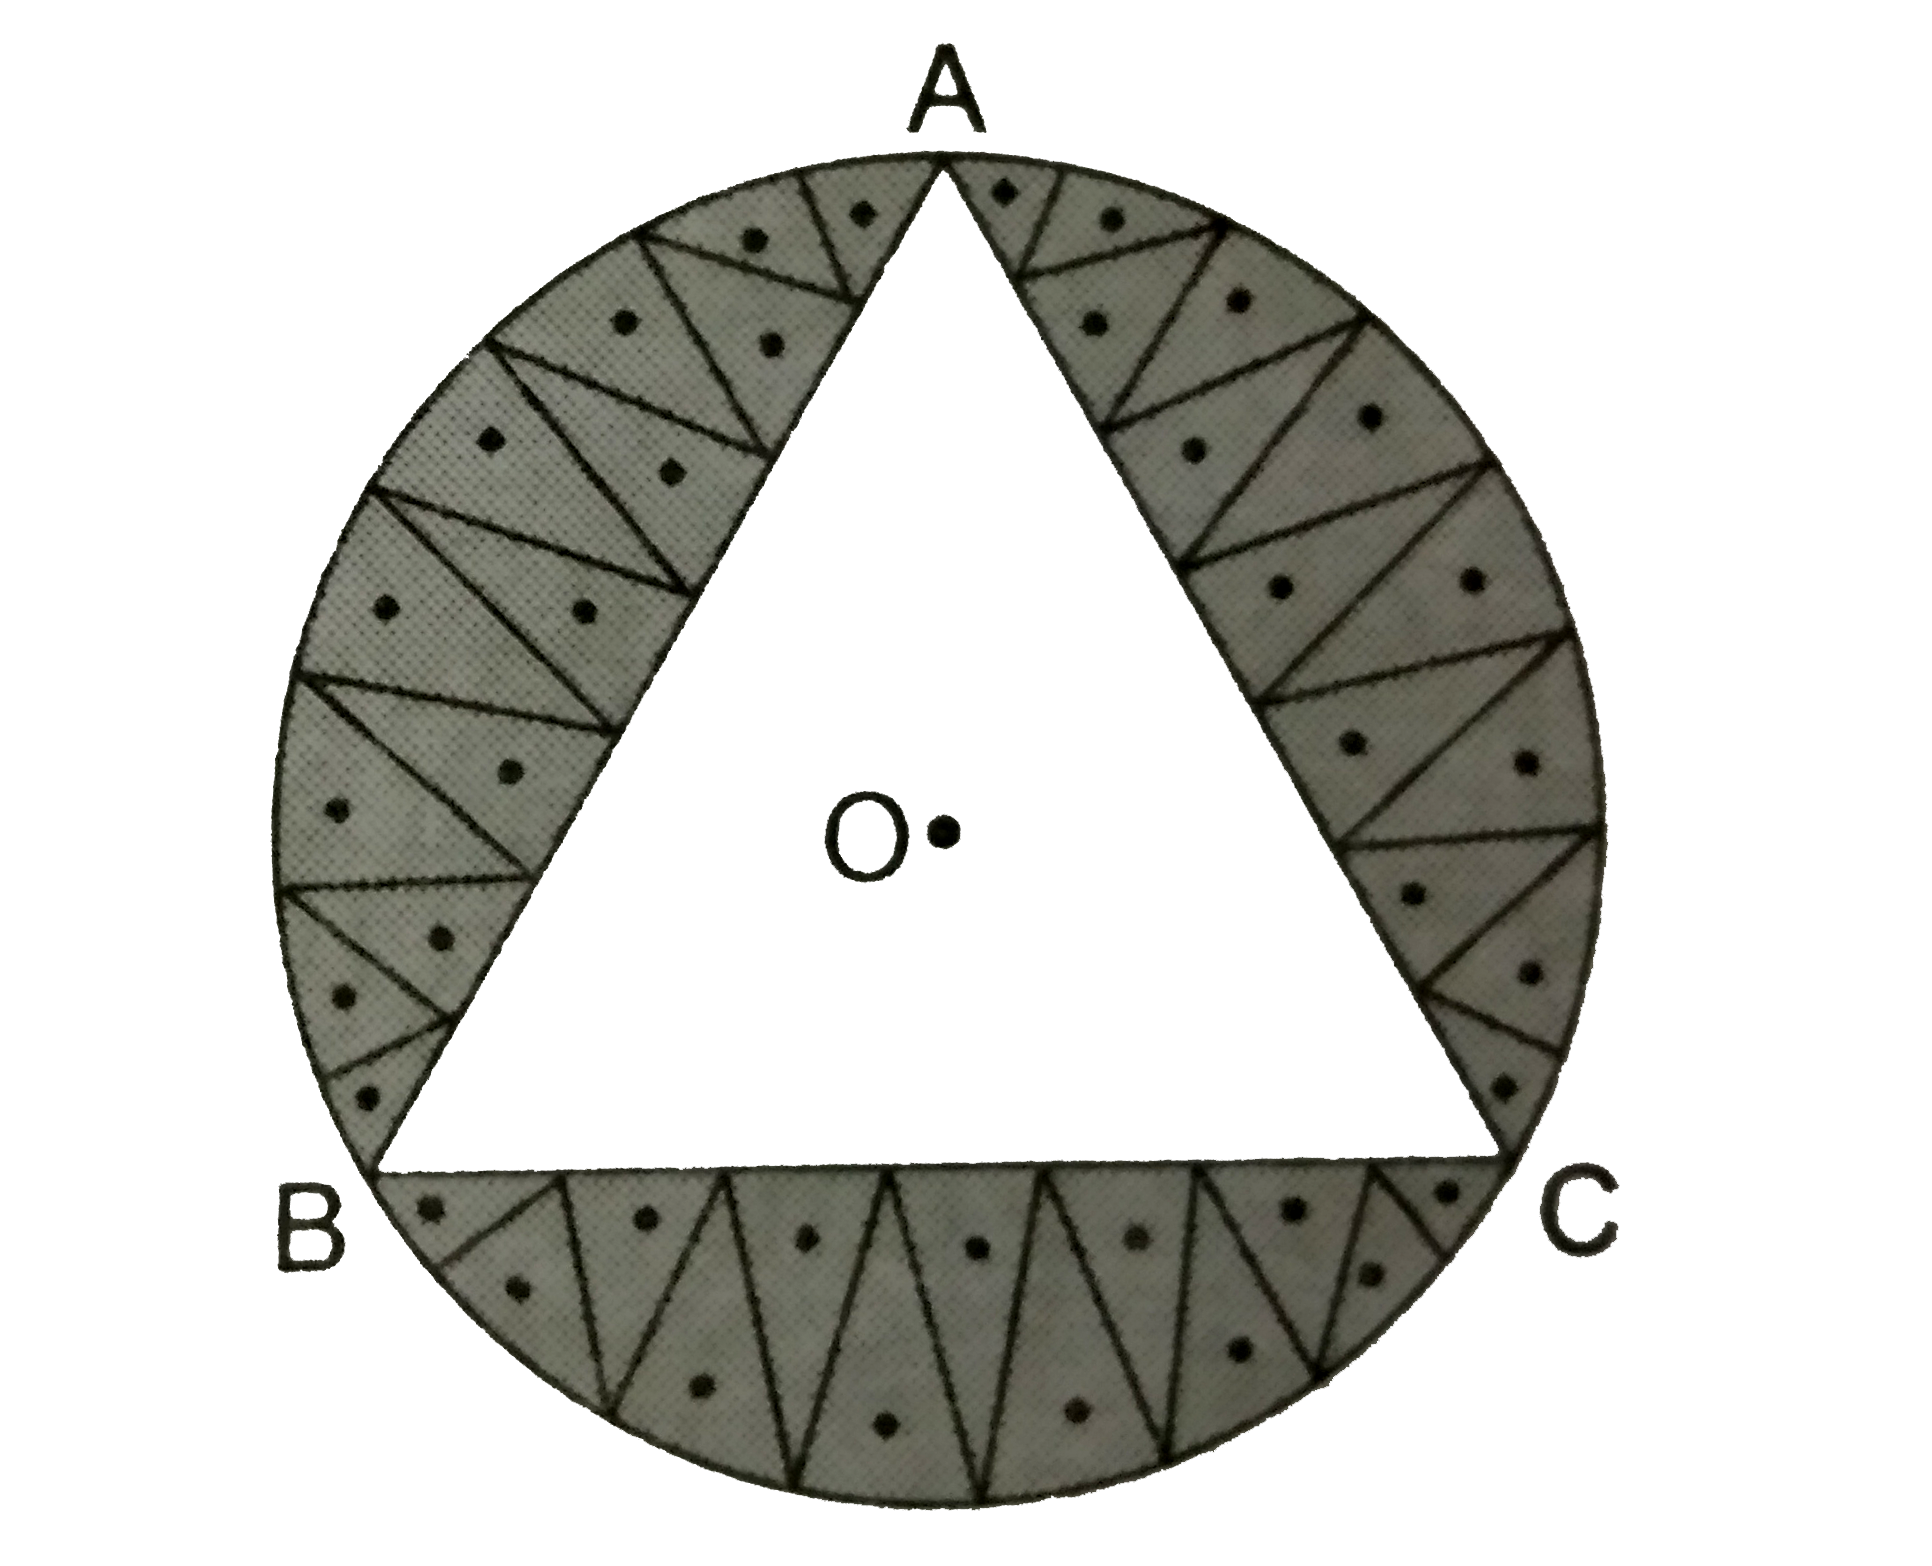 In a circulat table cover of radius 42 cm, a design is formed, leaving an equilateral triangle ABC in the middle as shown in the figure.   Find the area of the design. [ Use sqrt(3)=1.73]